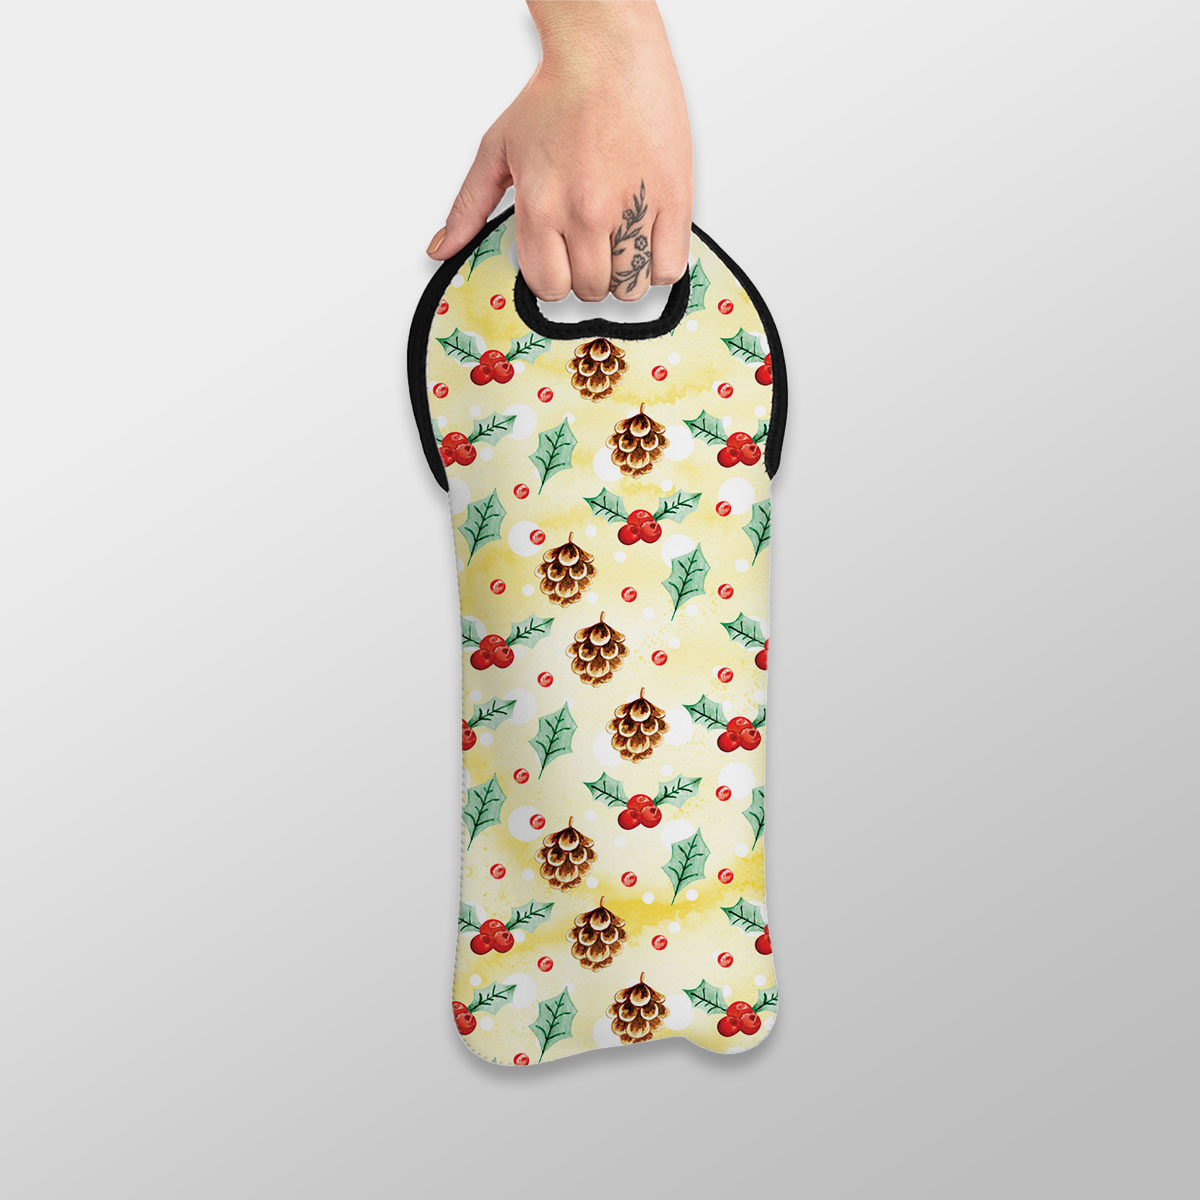 Holly Leaf, Pine Cone, Holly Berry Wine Tote Bag